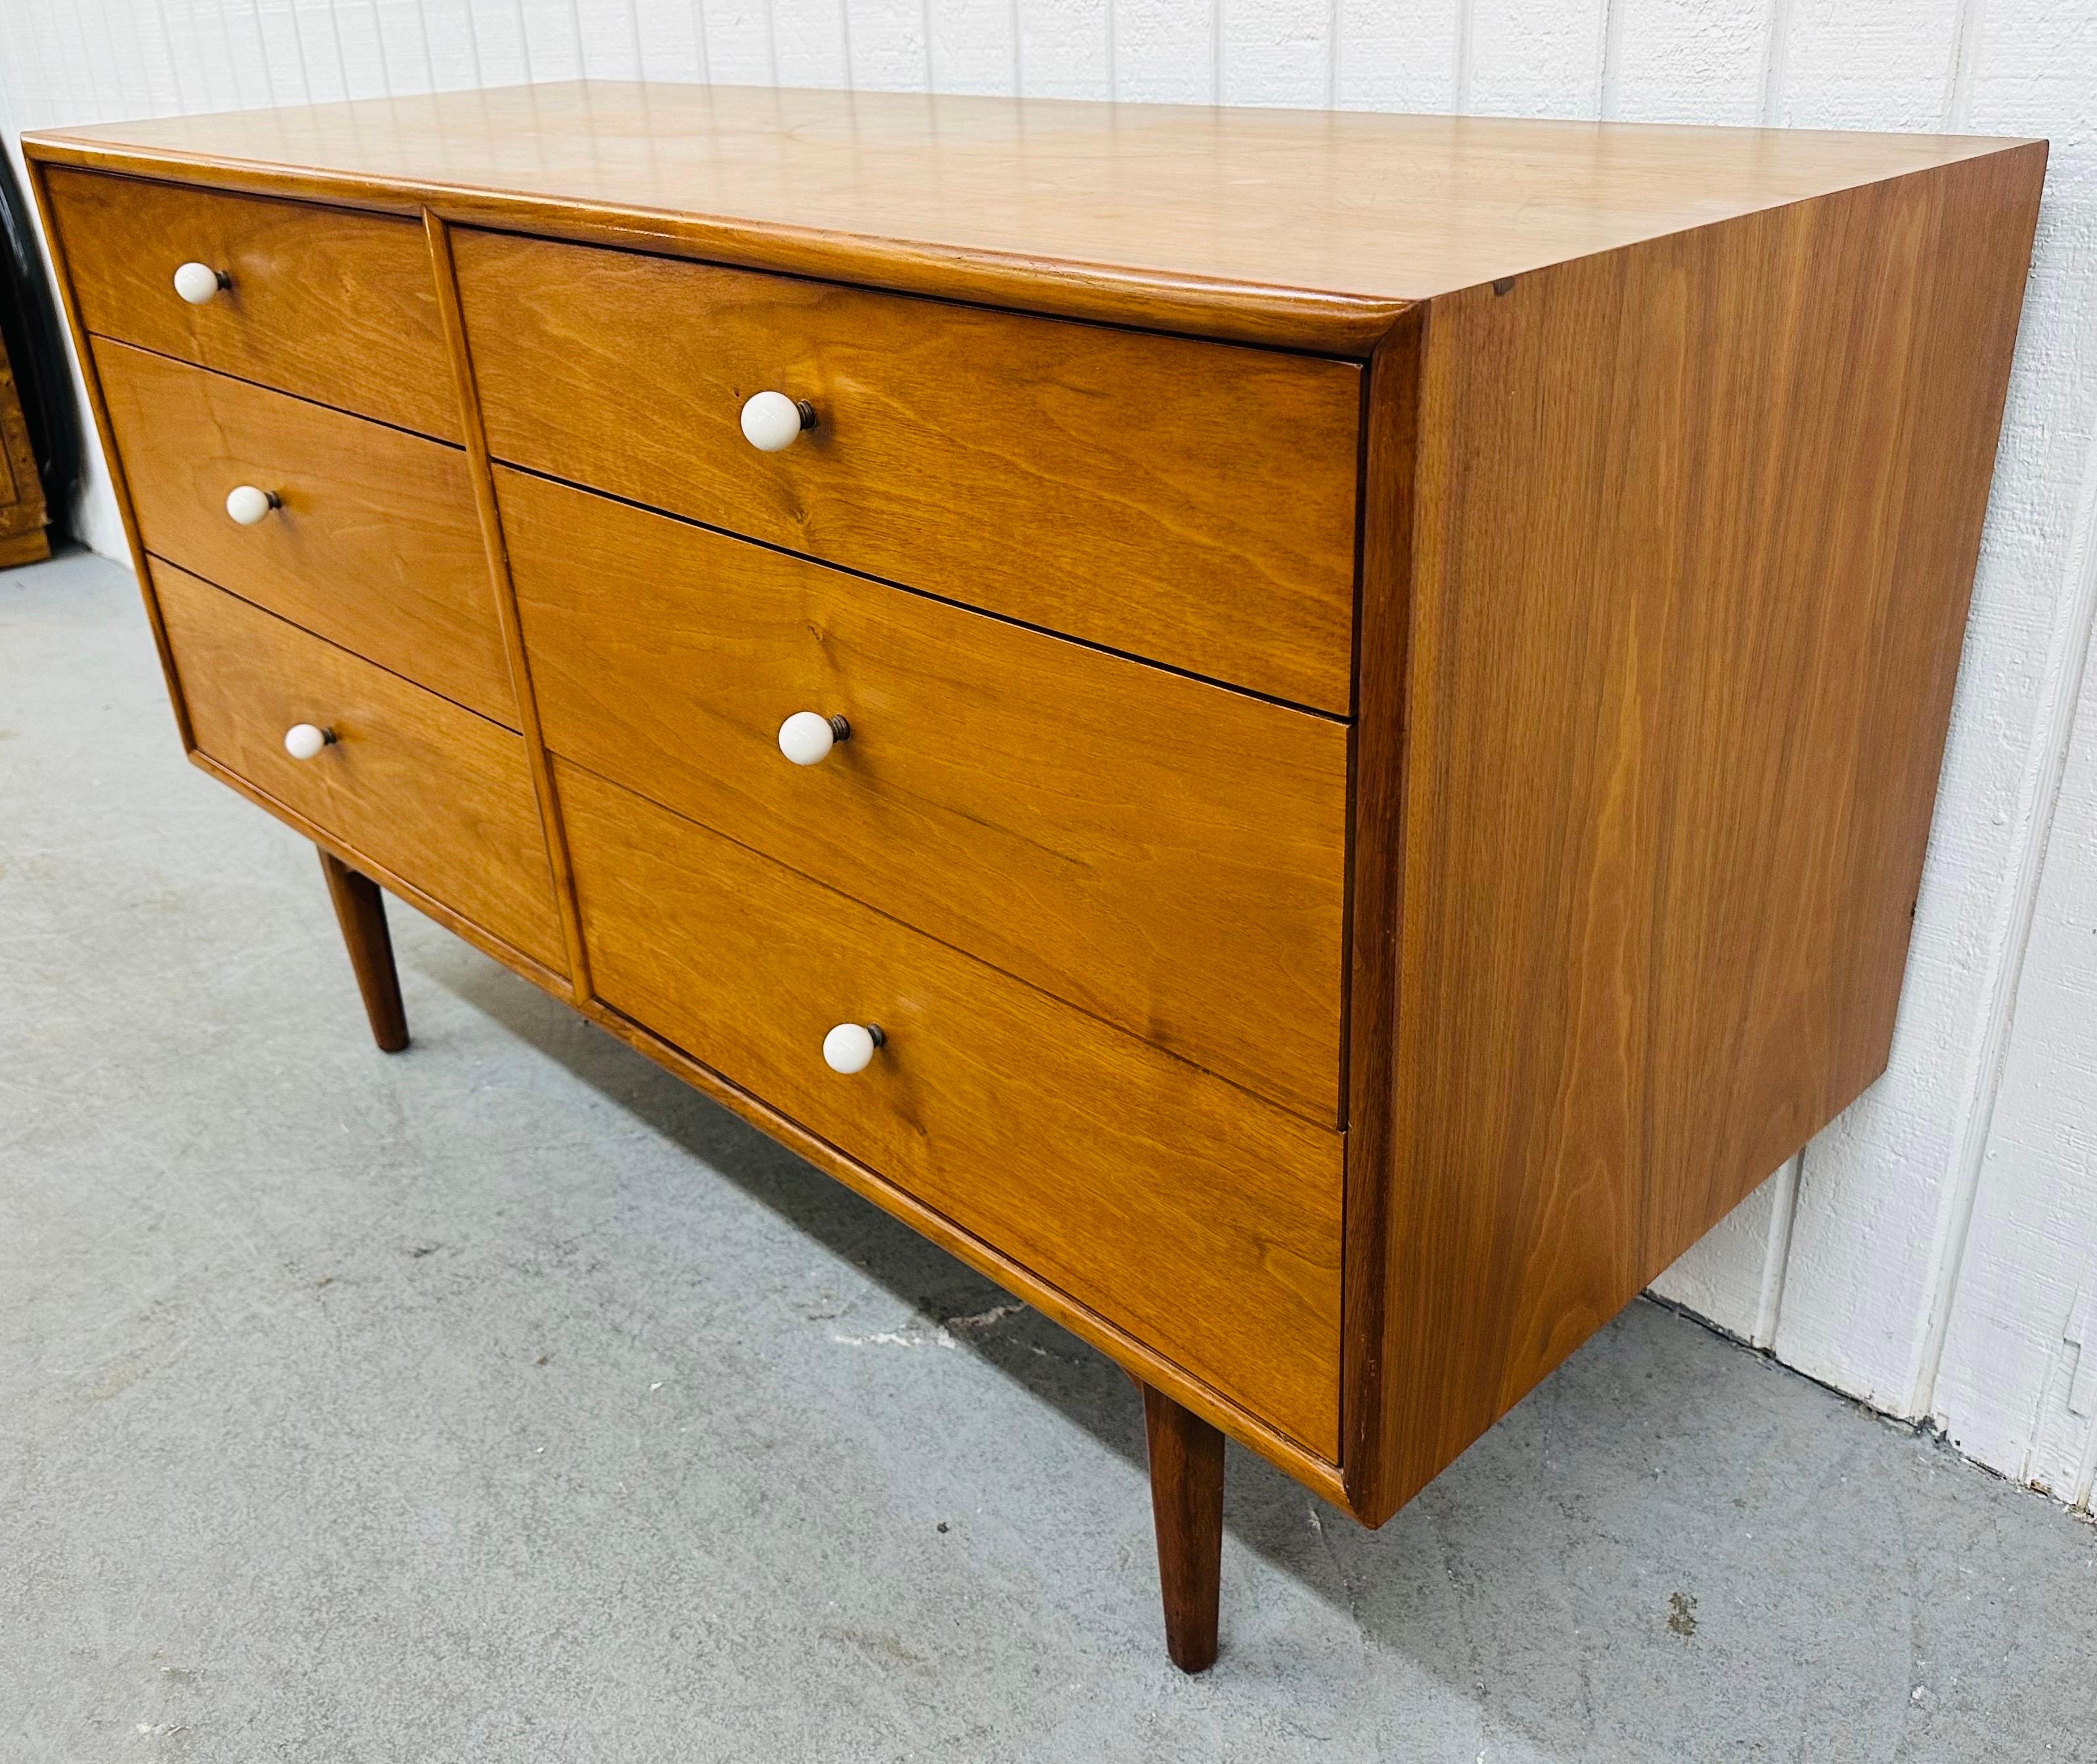 This listing is for a Mid-Century Modern Drexel Declaration Walnut Dresser. Featuring a straight line design, six drawers for storage, original milk glass white knobs, and a beautiful walnut finish. This is an exceptional combination of quality and